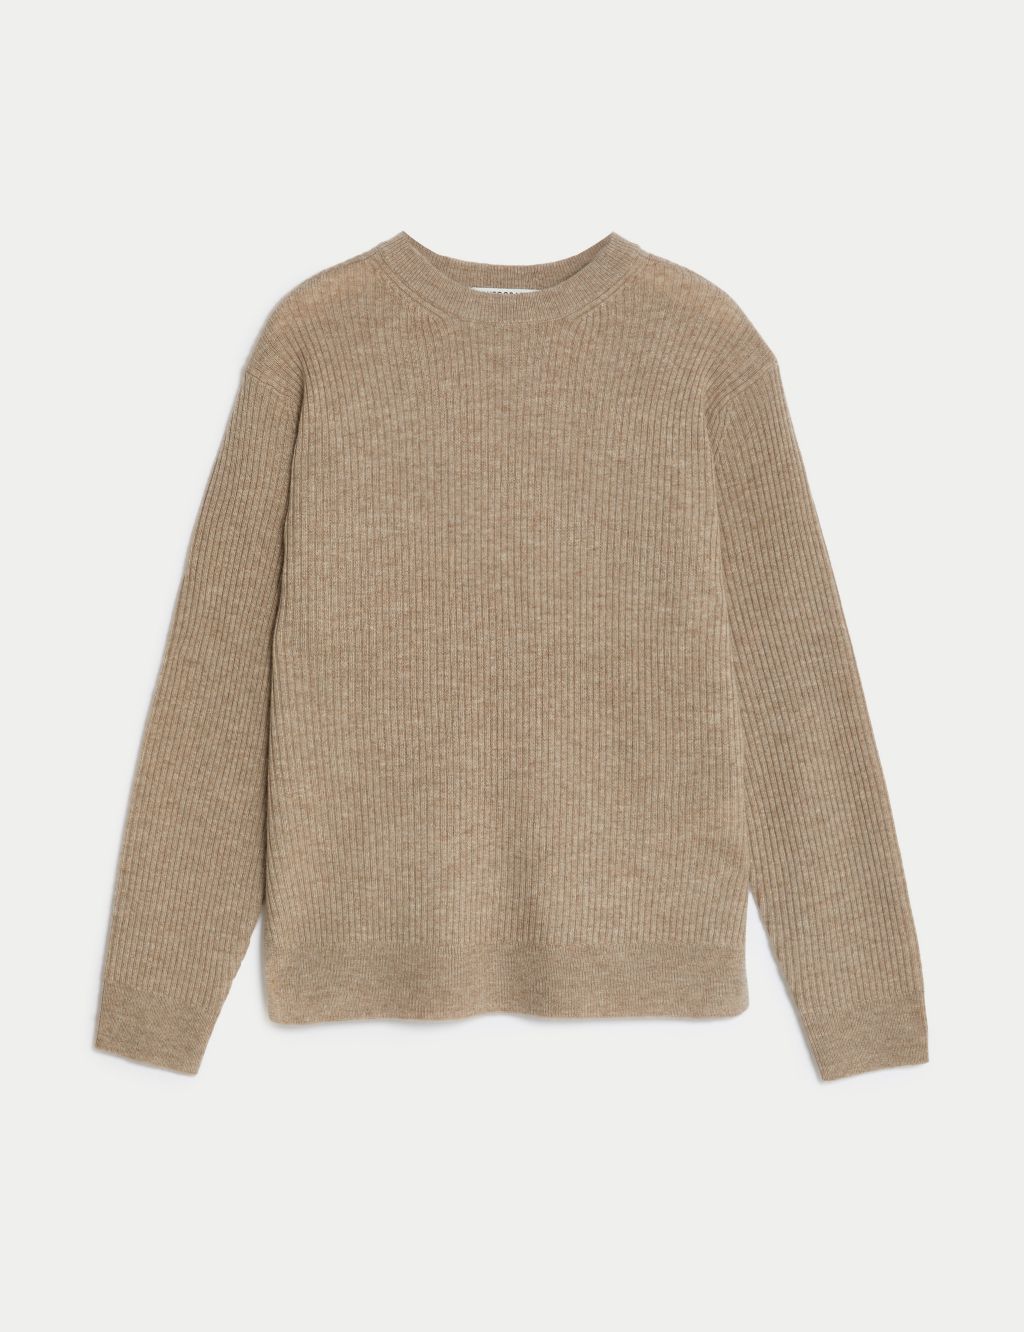 Merino Wool With Cashmere Ribbed Jumper image 1